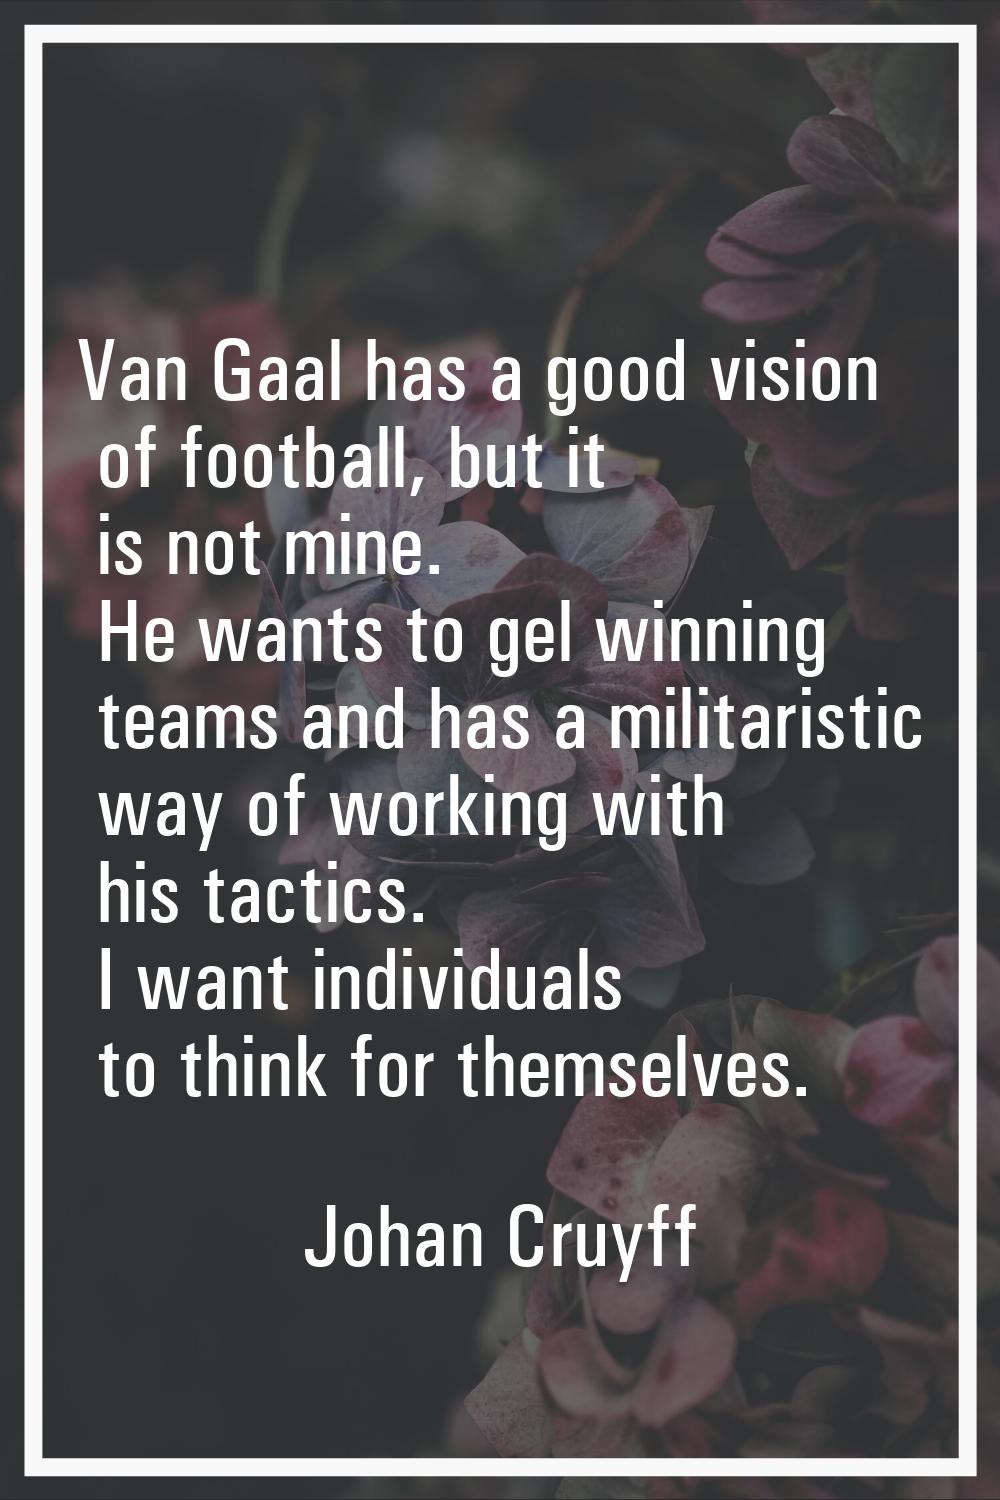 Van Gaal has a good vision of football, but it is not mine. He wants to gel winning teams and has a